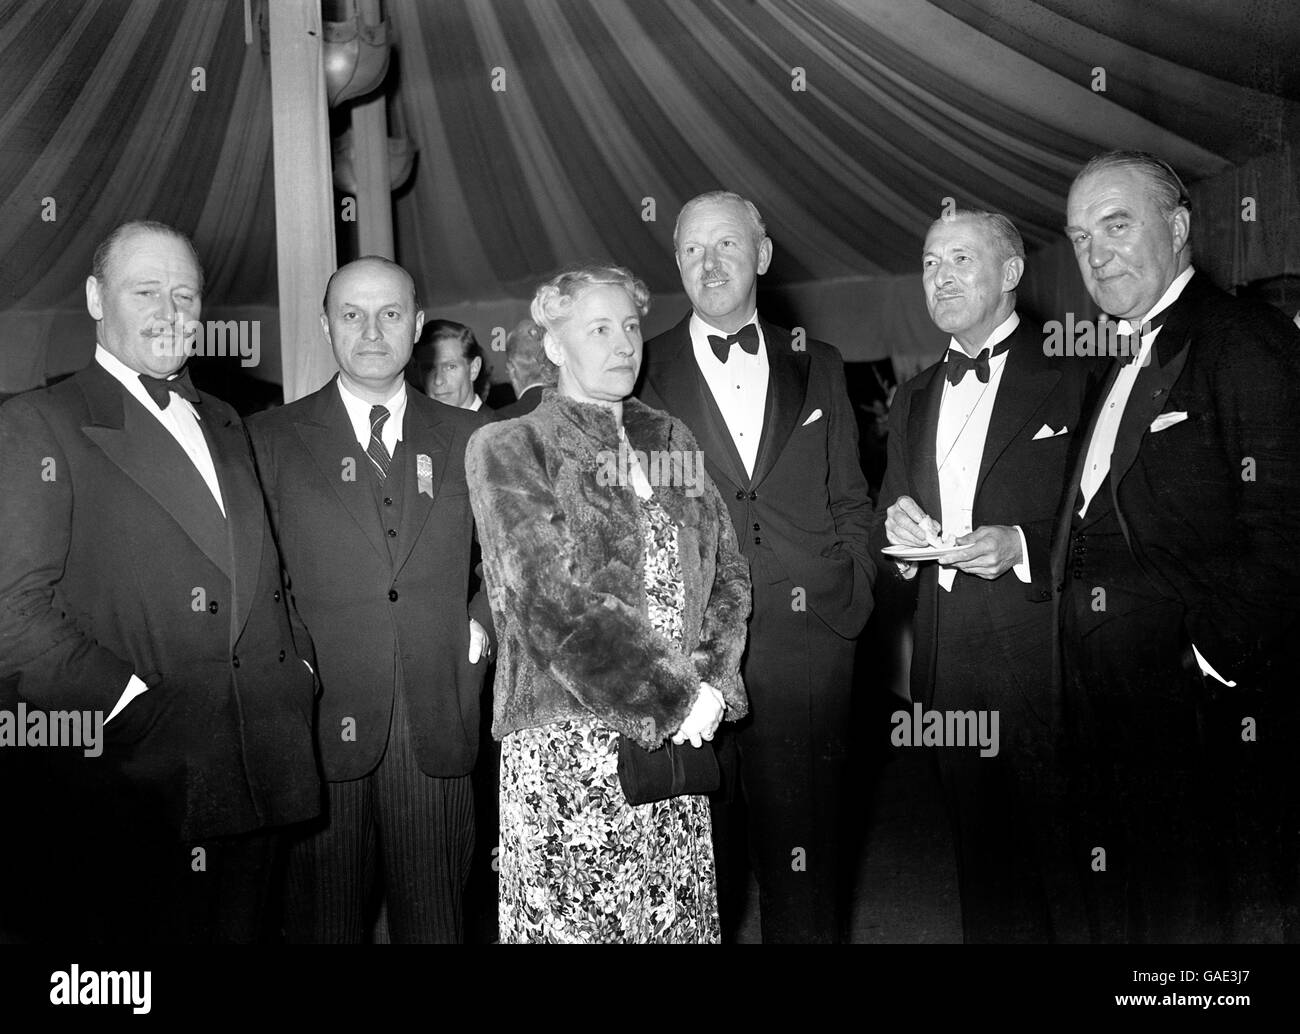 (L-R) Colonel E.A Hunter, Dr. Anderjevic (President of Yugoslav Football Association), Mrs Rous, Mr S.F. Rous (Secretary of Football Association), Mr A. Drewry (Chairman English International Committee) and Mr Von Frenkell (President Finland Football Association) attend the party Stock Photo